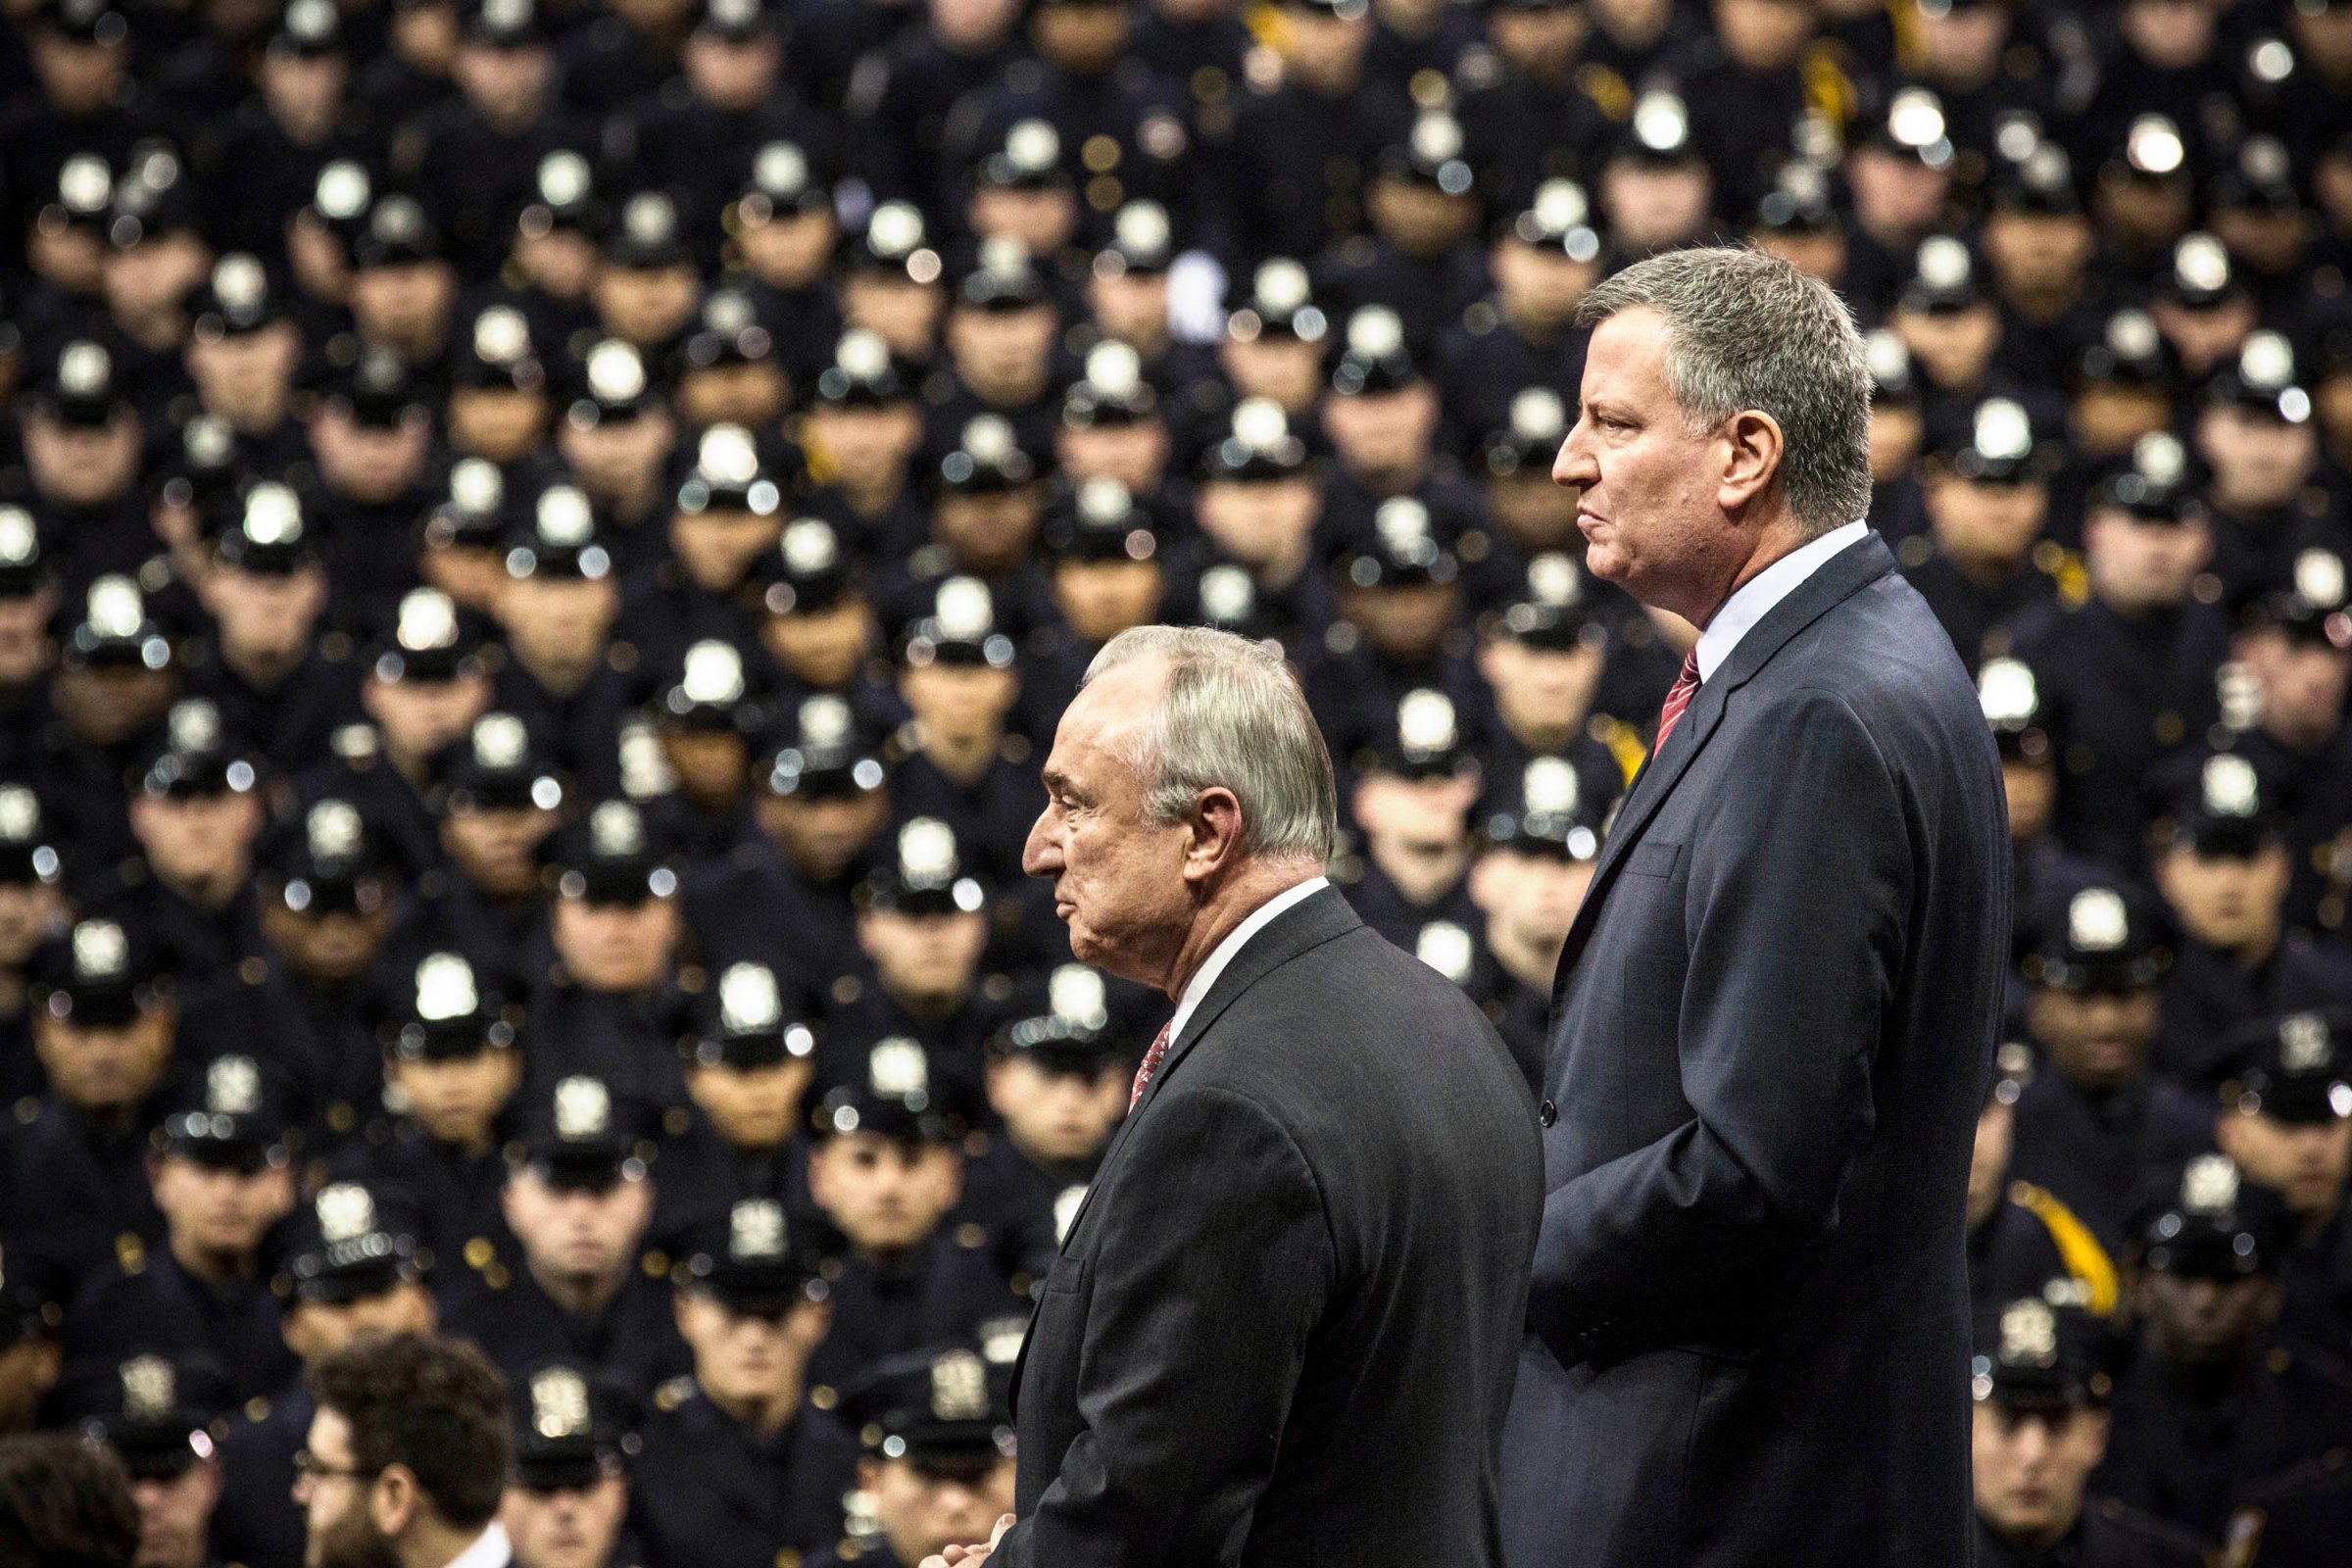 nypd-security-police-terrorism